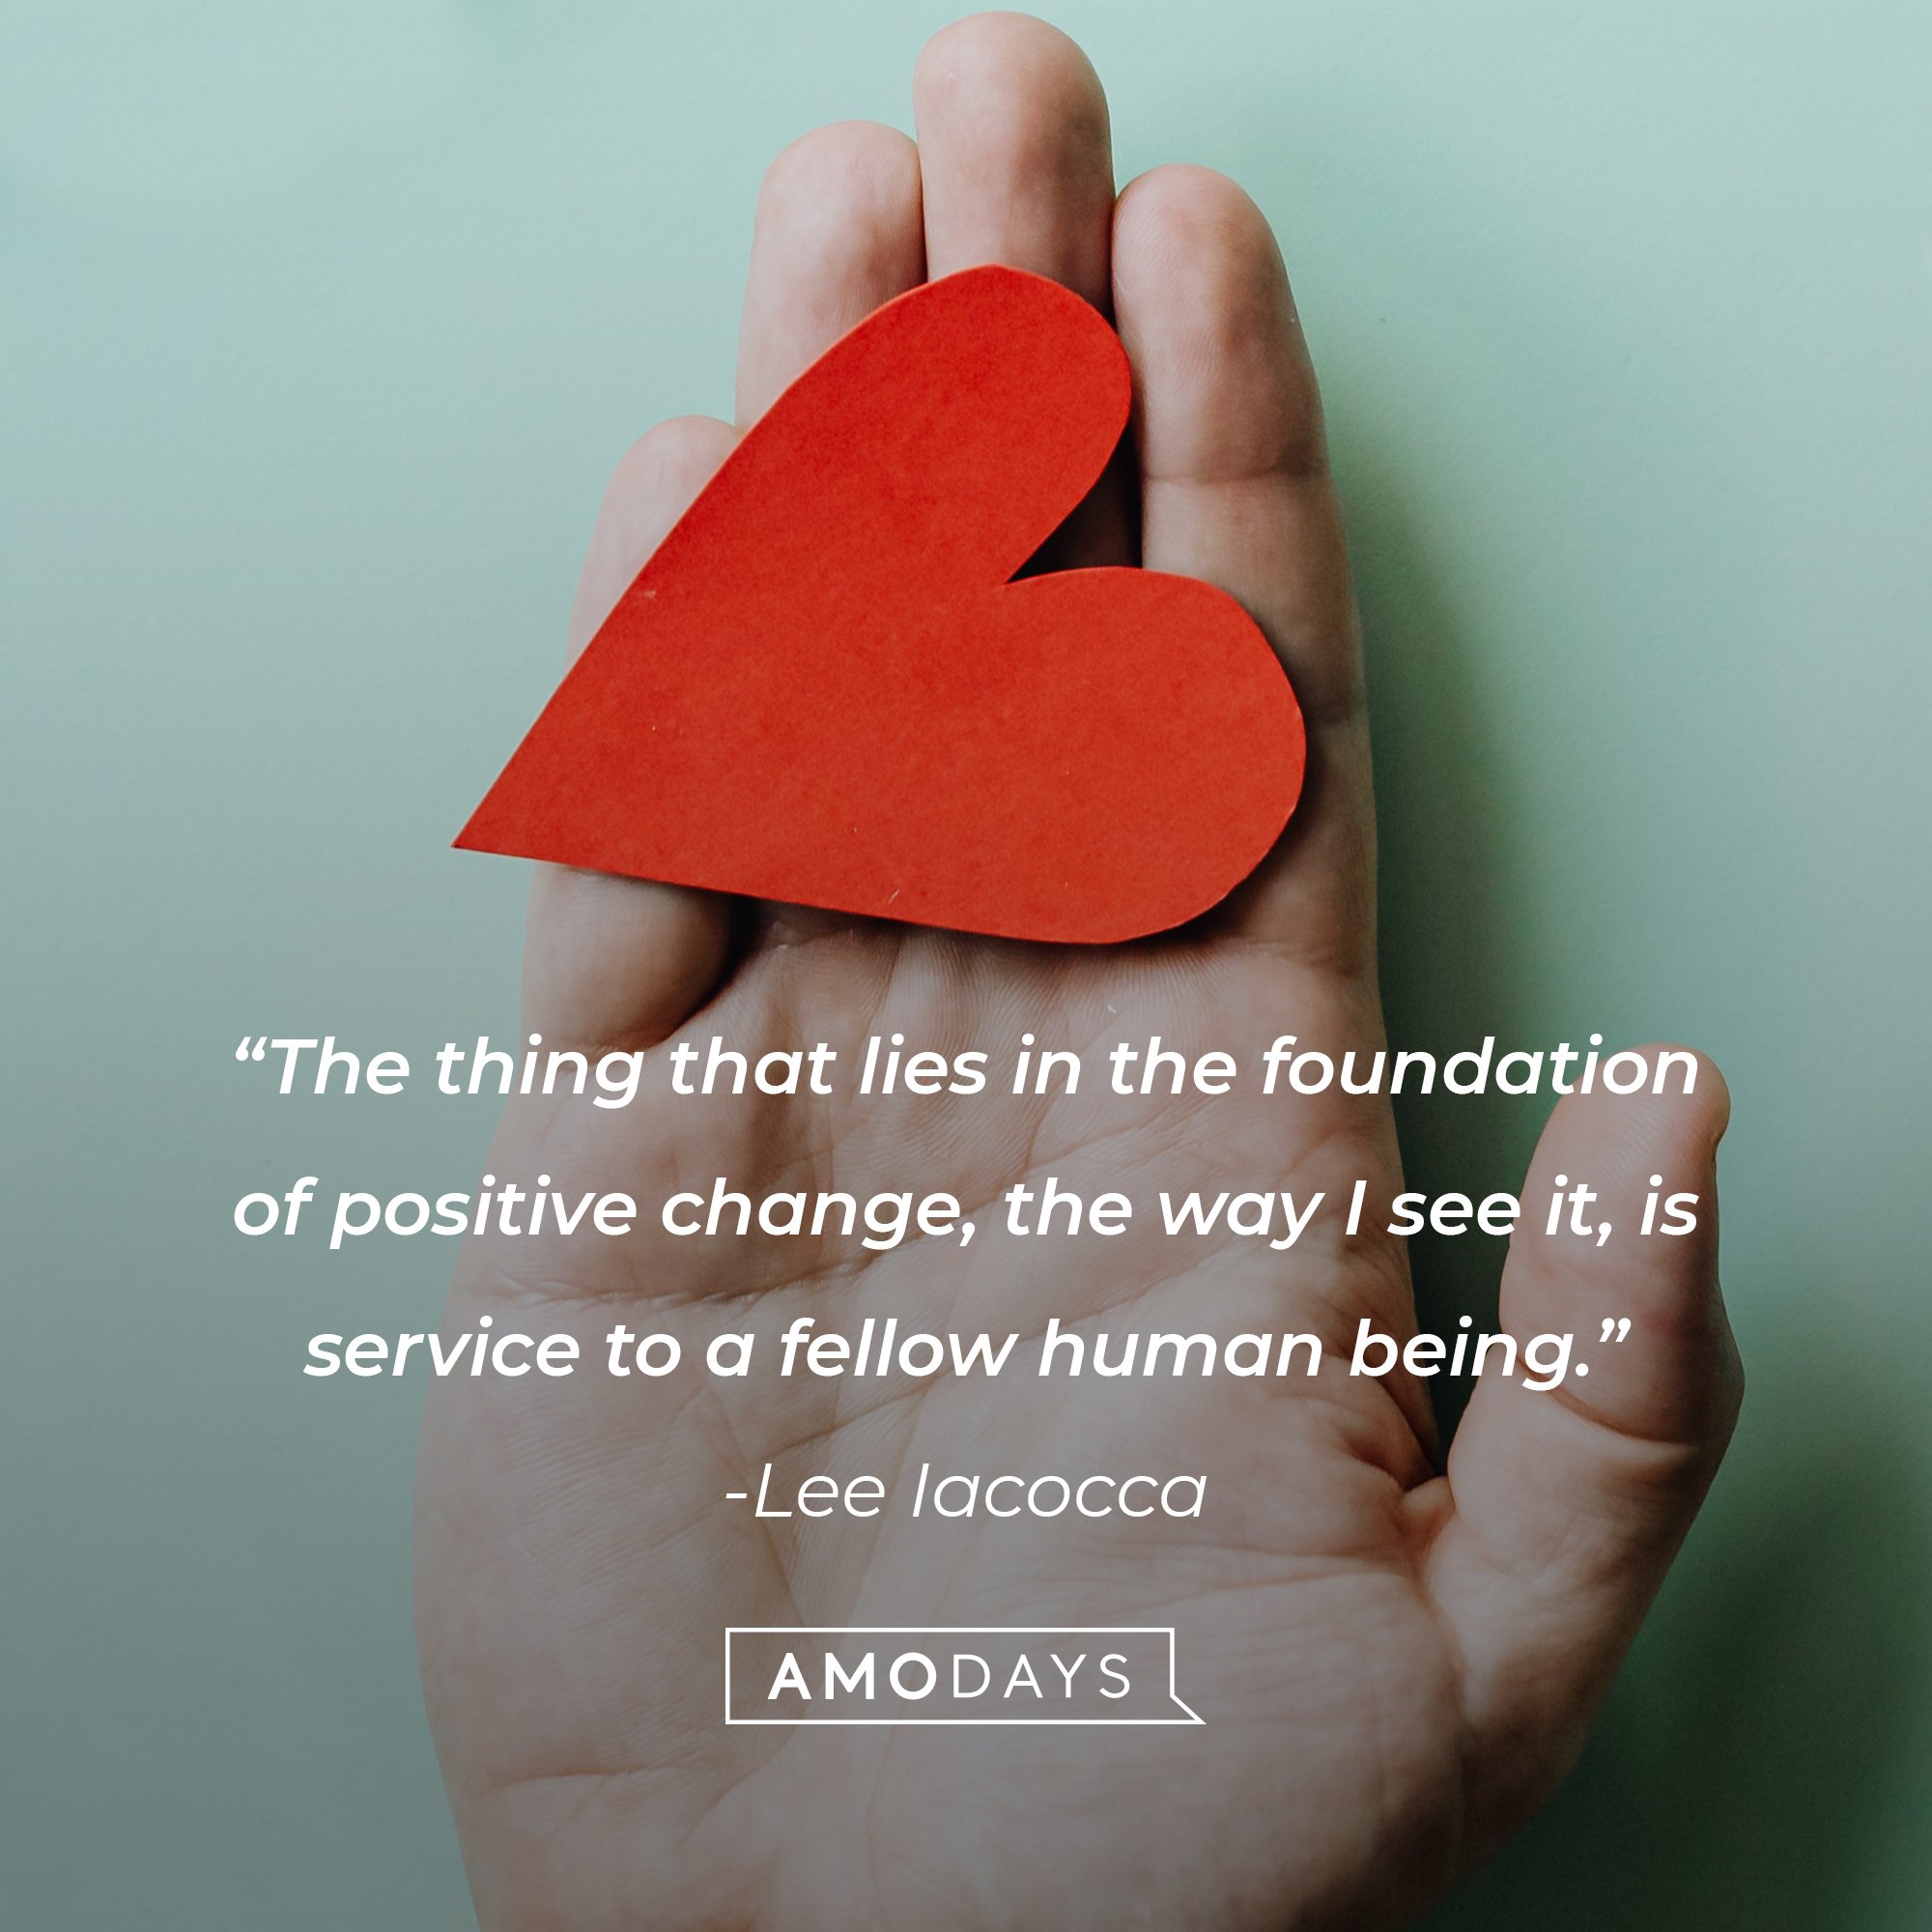 Lee Iacocca's quote: "The thing that lies in the foundation of positive change, the way I see it, is service to a fellow human being." | Image: AmoDays